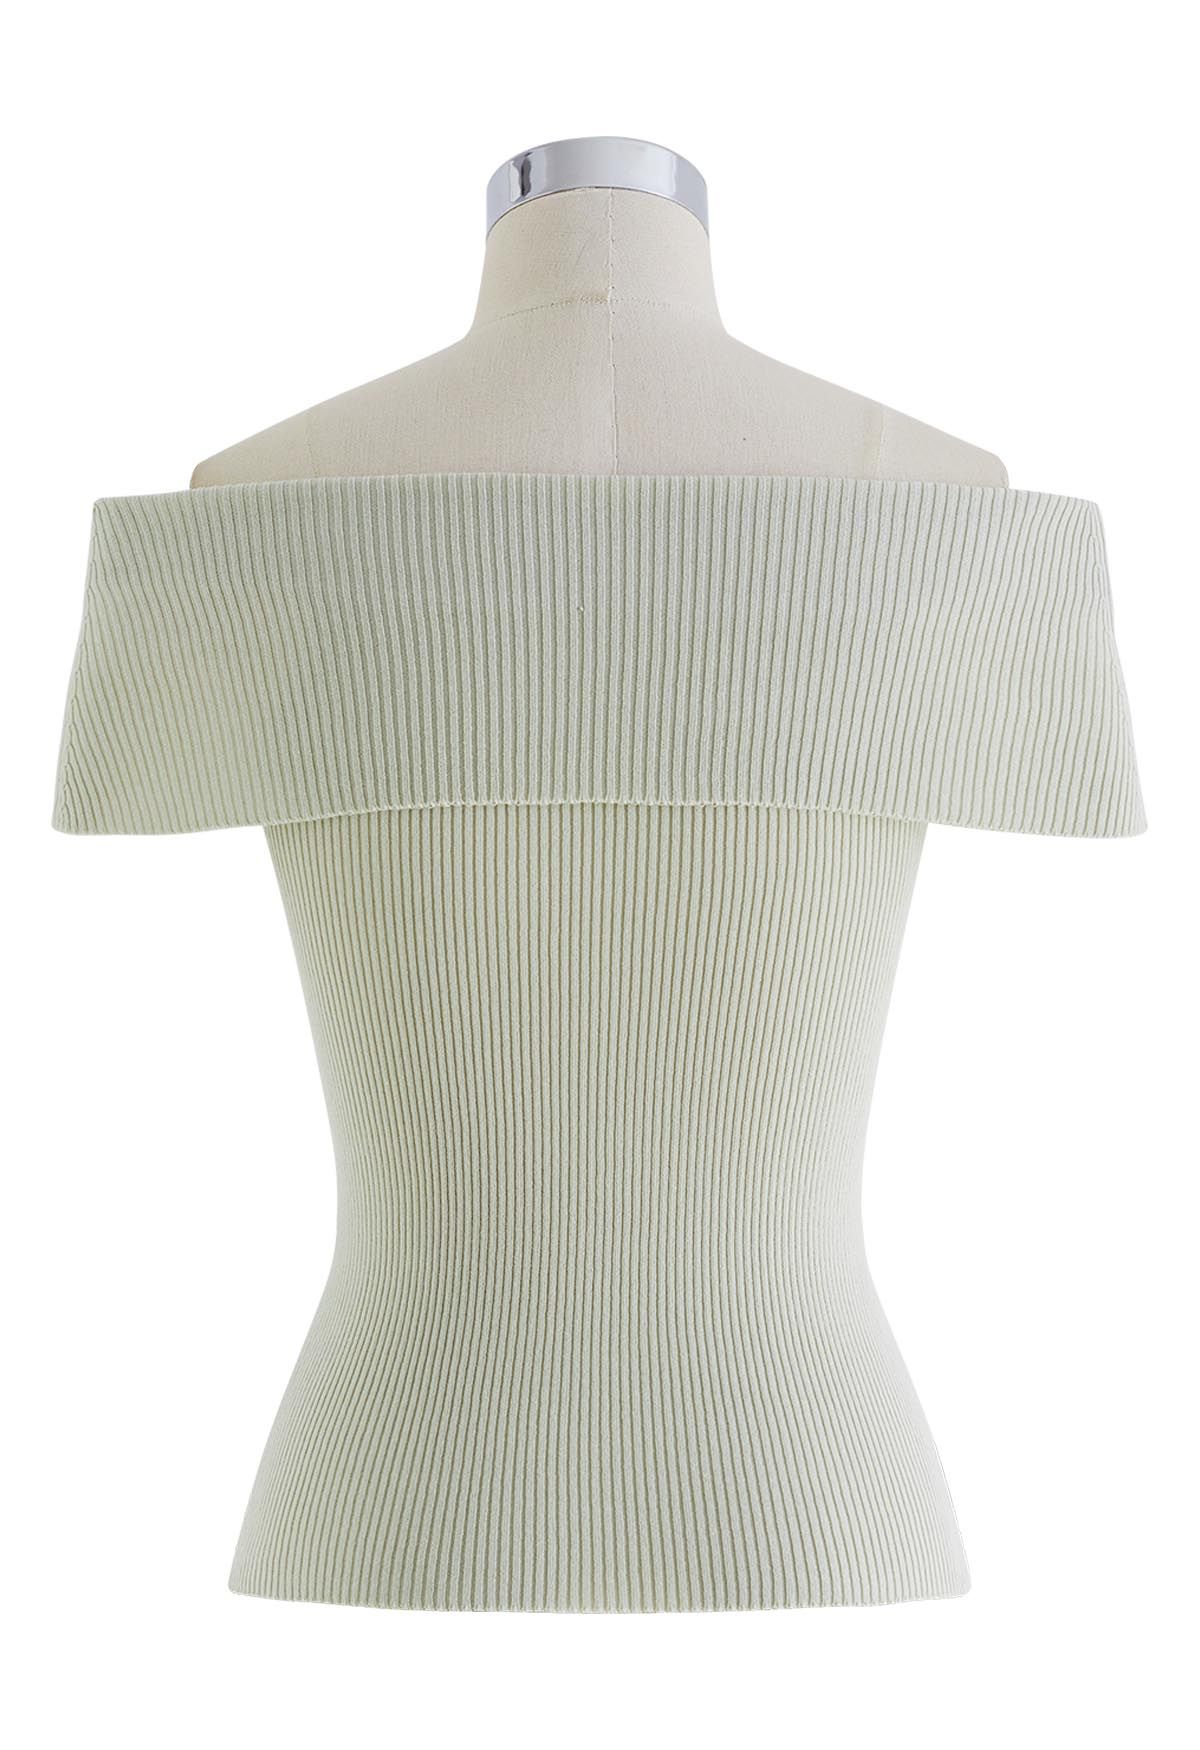 Folded Off-Shoulder Rib Knit Top in Pea Green